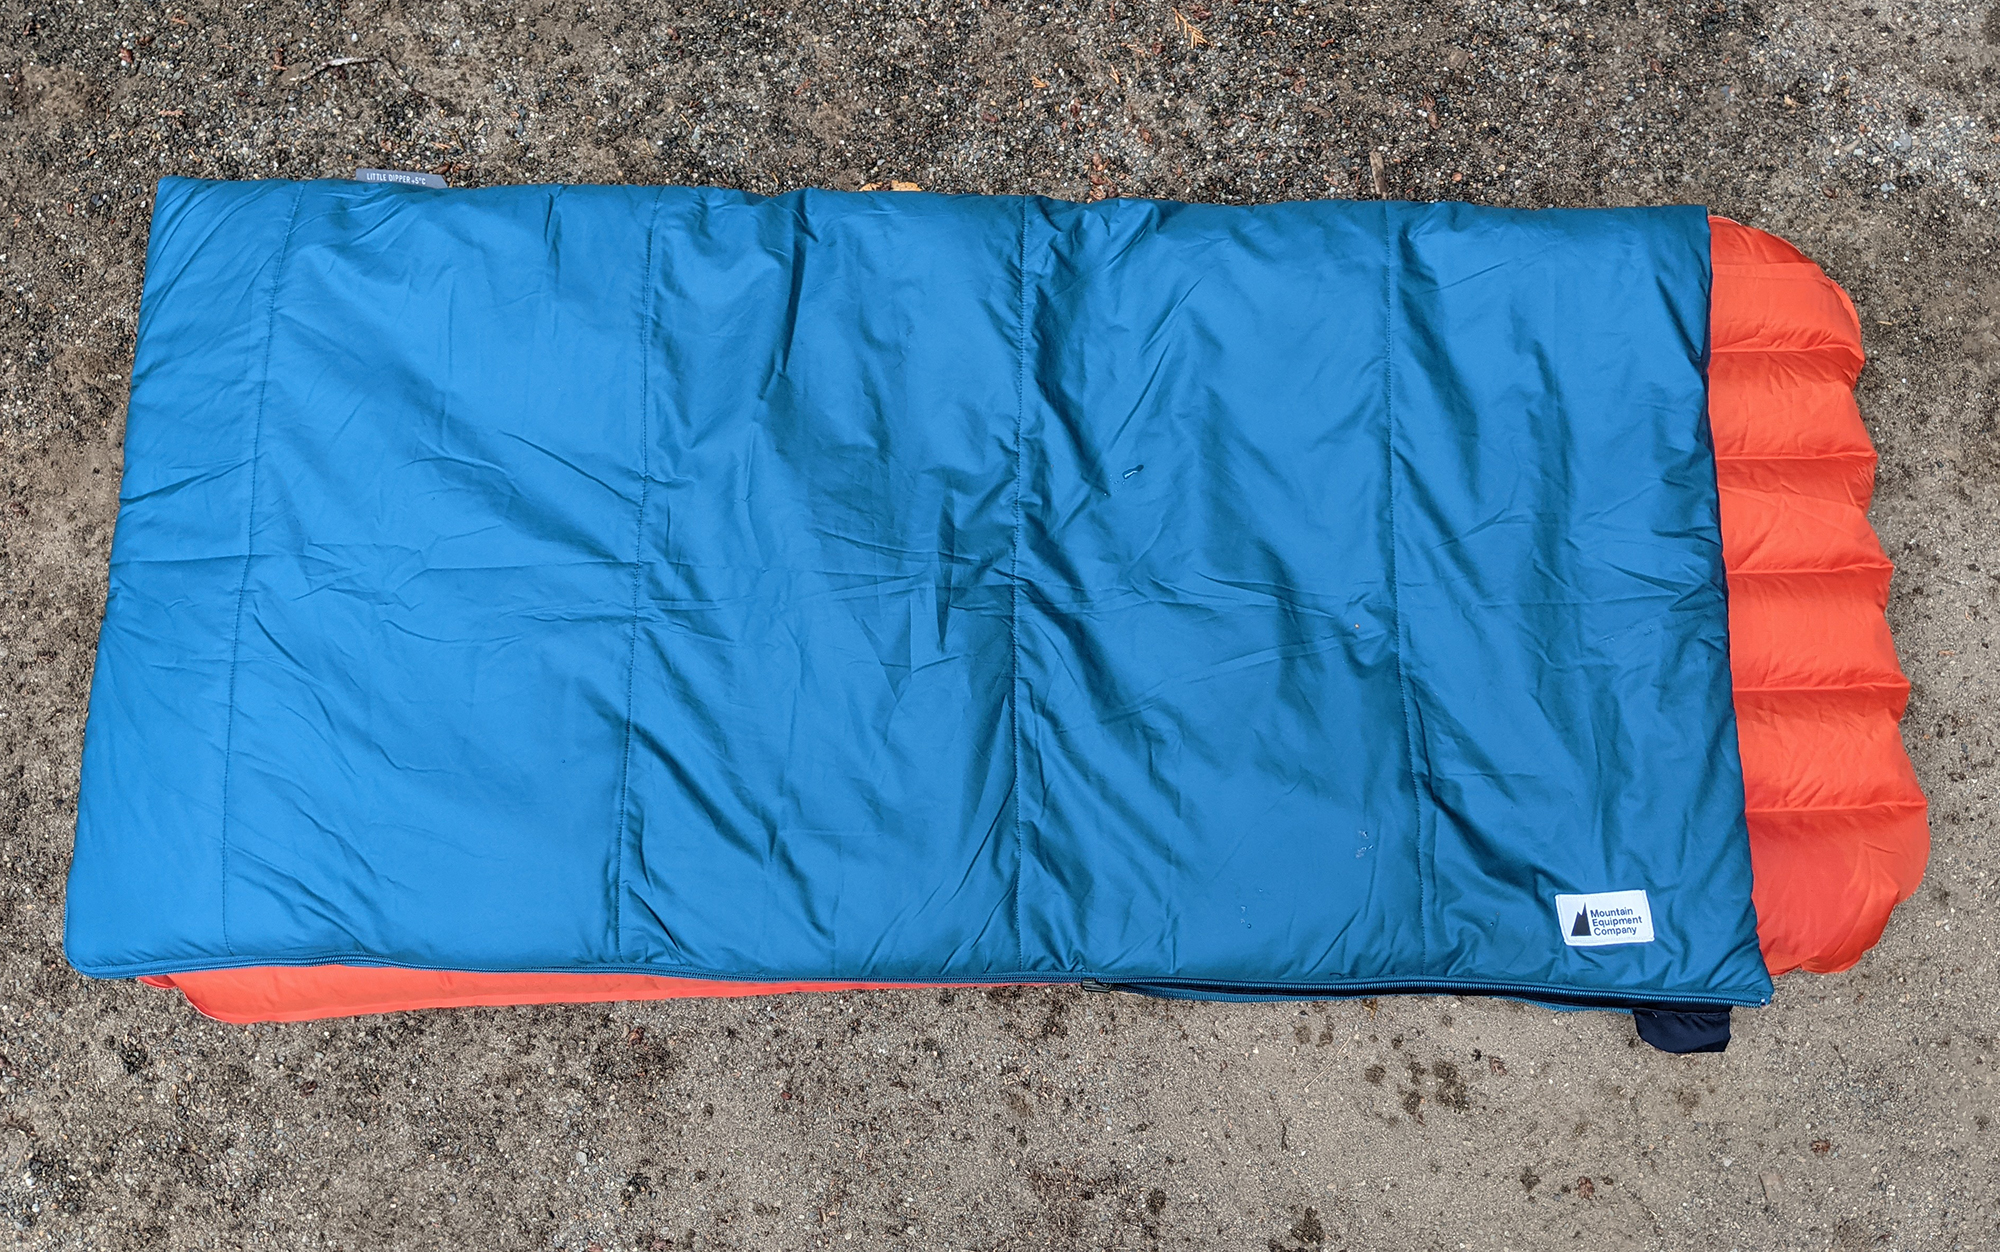 The MEC Little Dipper looks exactly like what you expect a childrenâs sleeping bag to look like. 